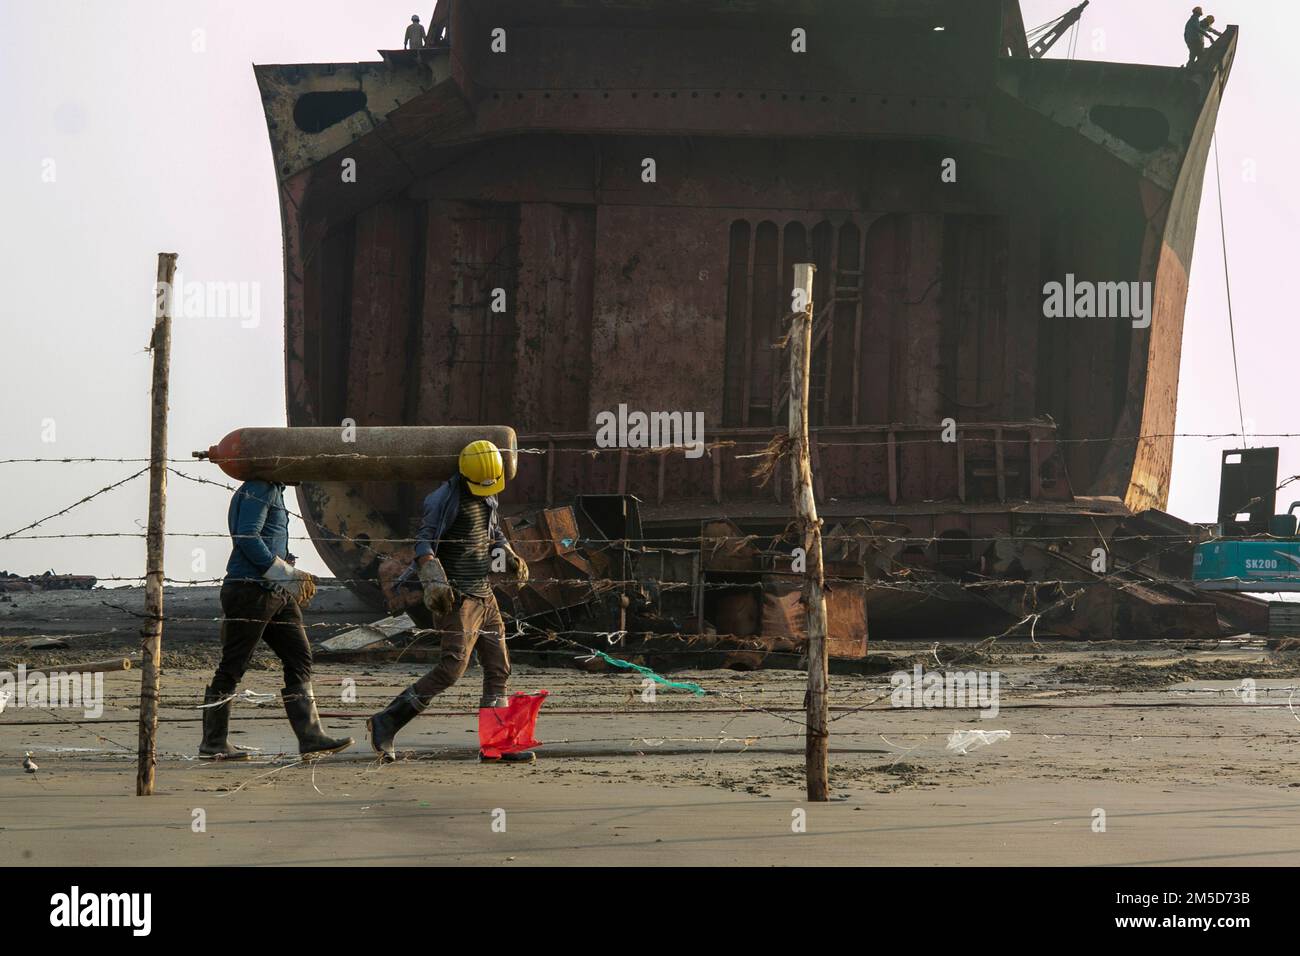 Ship Breaking Yard, Chattogram, Bngladesh, 20 Dec 2021  Workers at the ship breaking yard are busy cutting old ships. Stock Photo